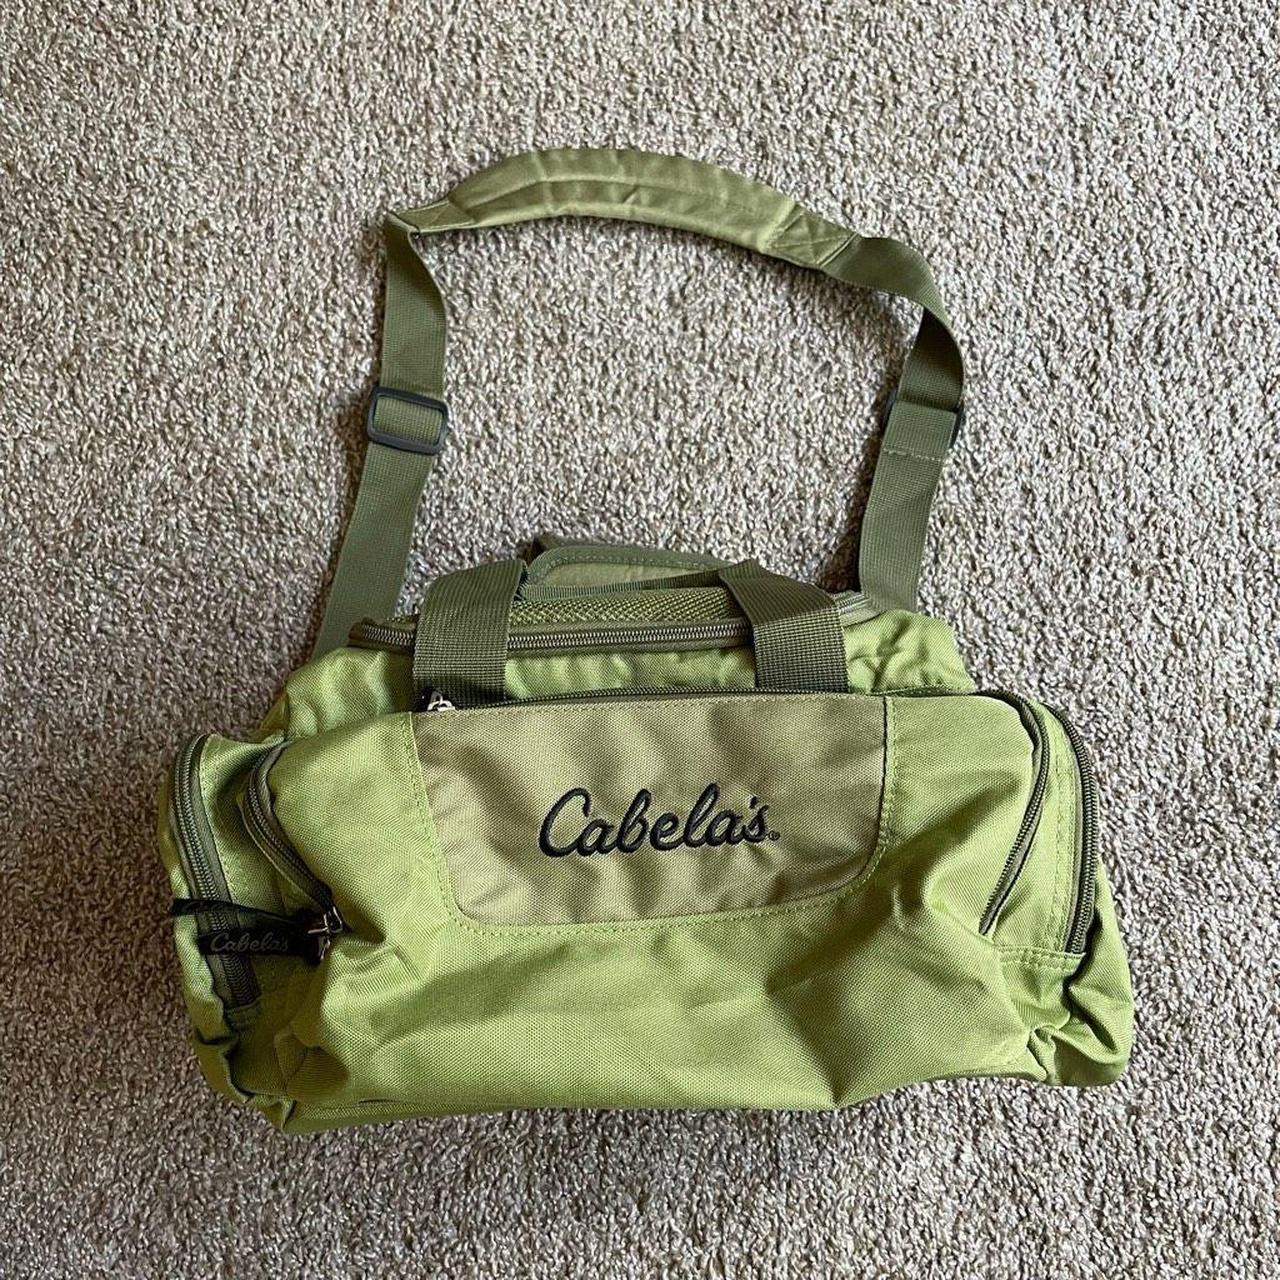 Real Life Product Review: Cabela's Catch-All Bag 